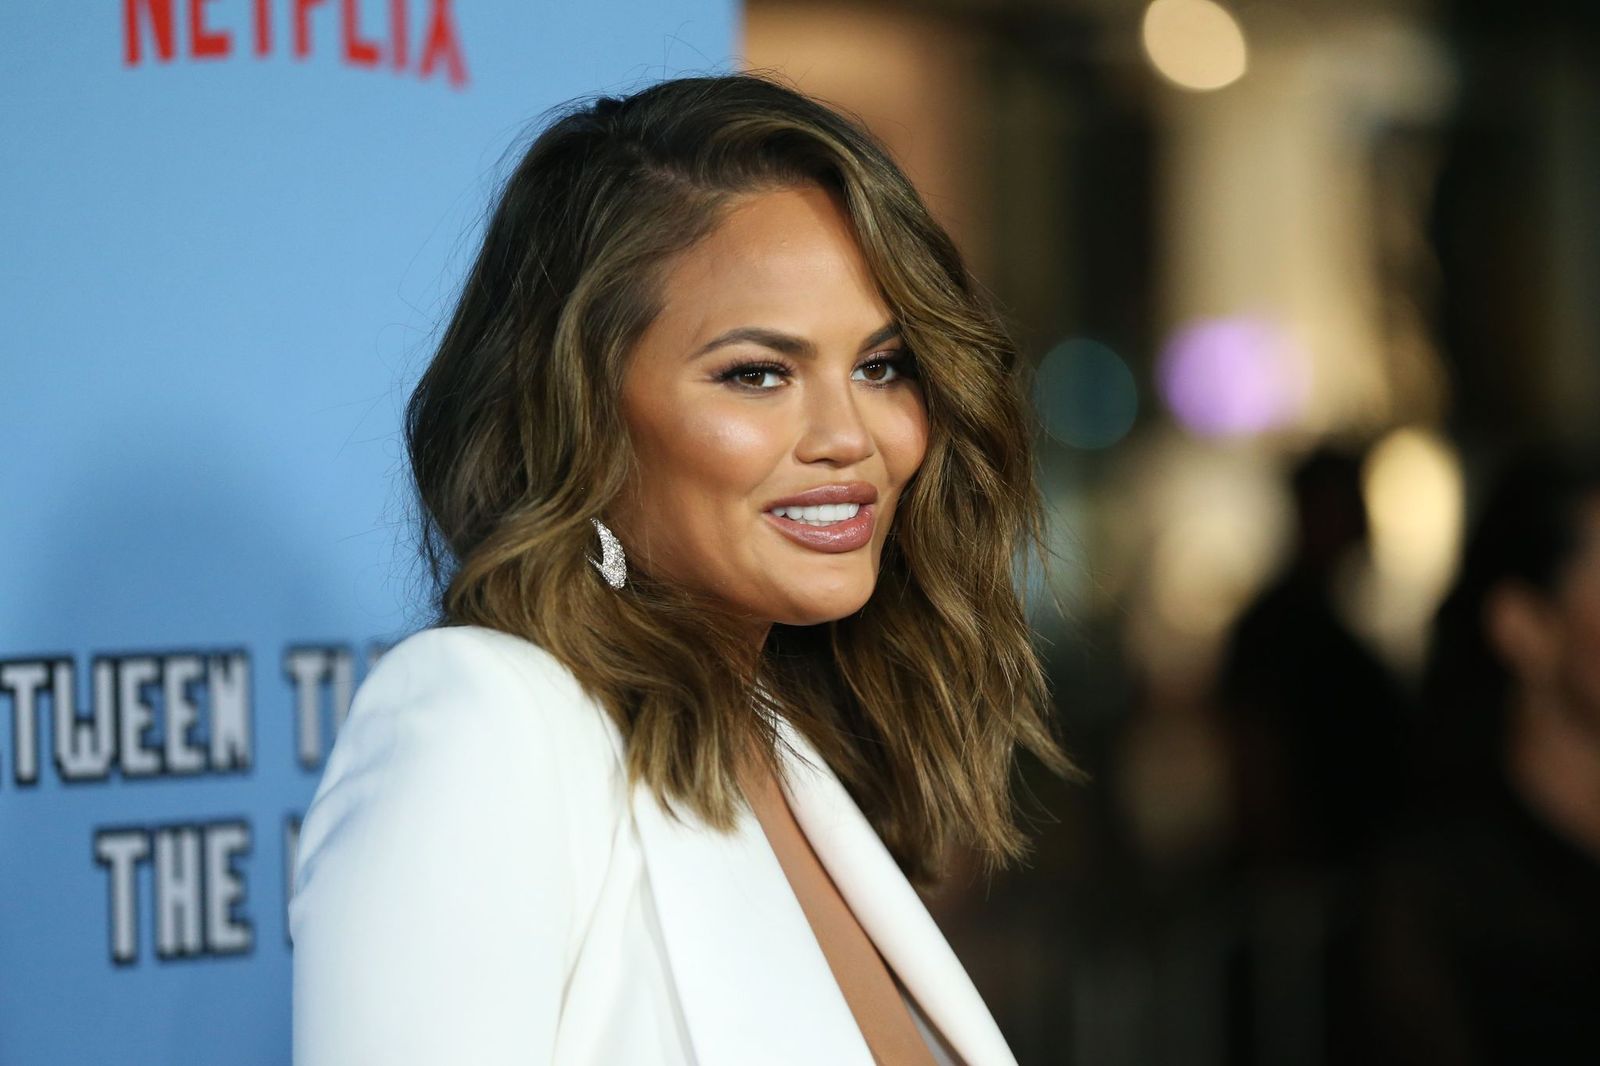 Chrissy Teigen attends the LA premiere of Netflix's "Between Two Ferns: The Movie" at ArcLight Hollywood on September 16, 2019 in Hollywood, California. | Photo: Getty Images